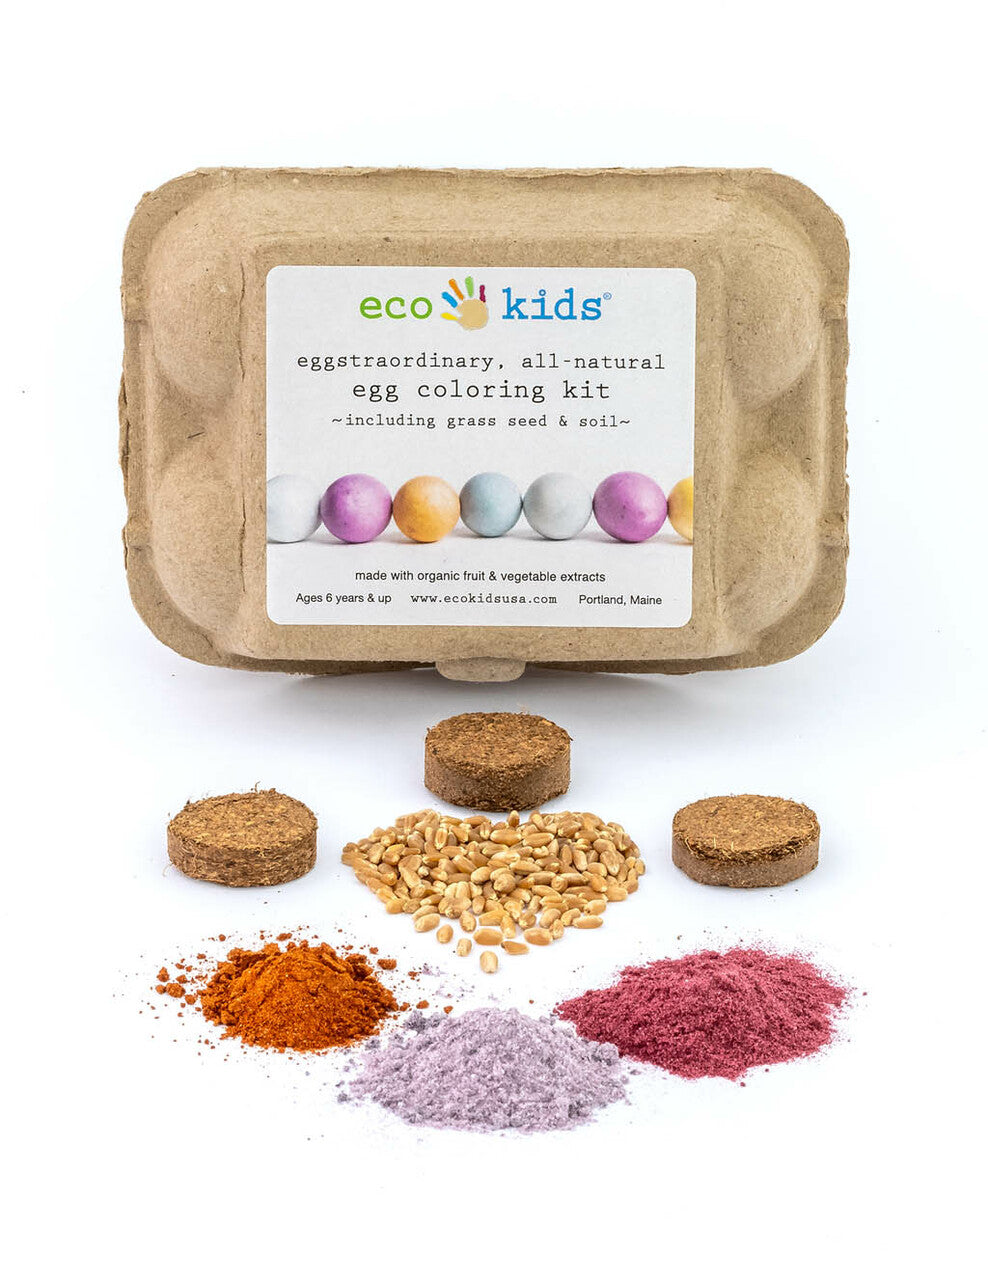 Eco-Kids Egg Coloring and Grass Growing Kit